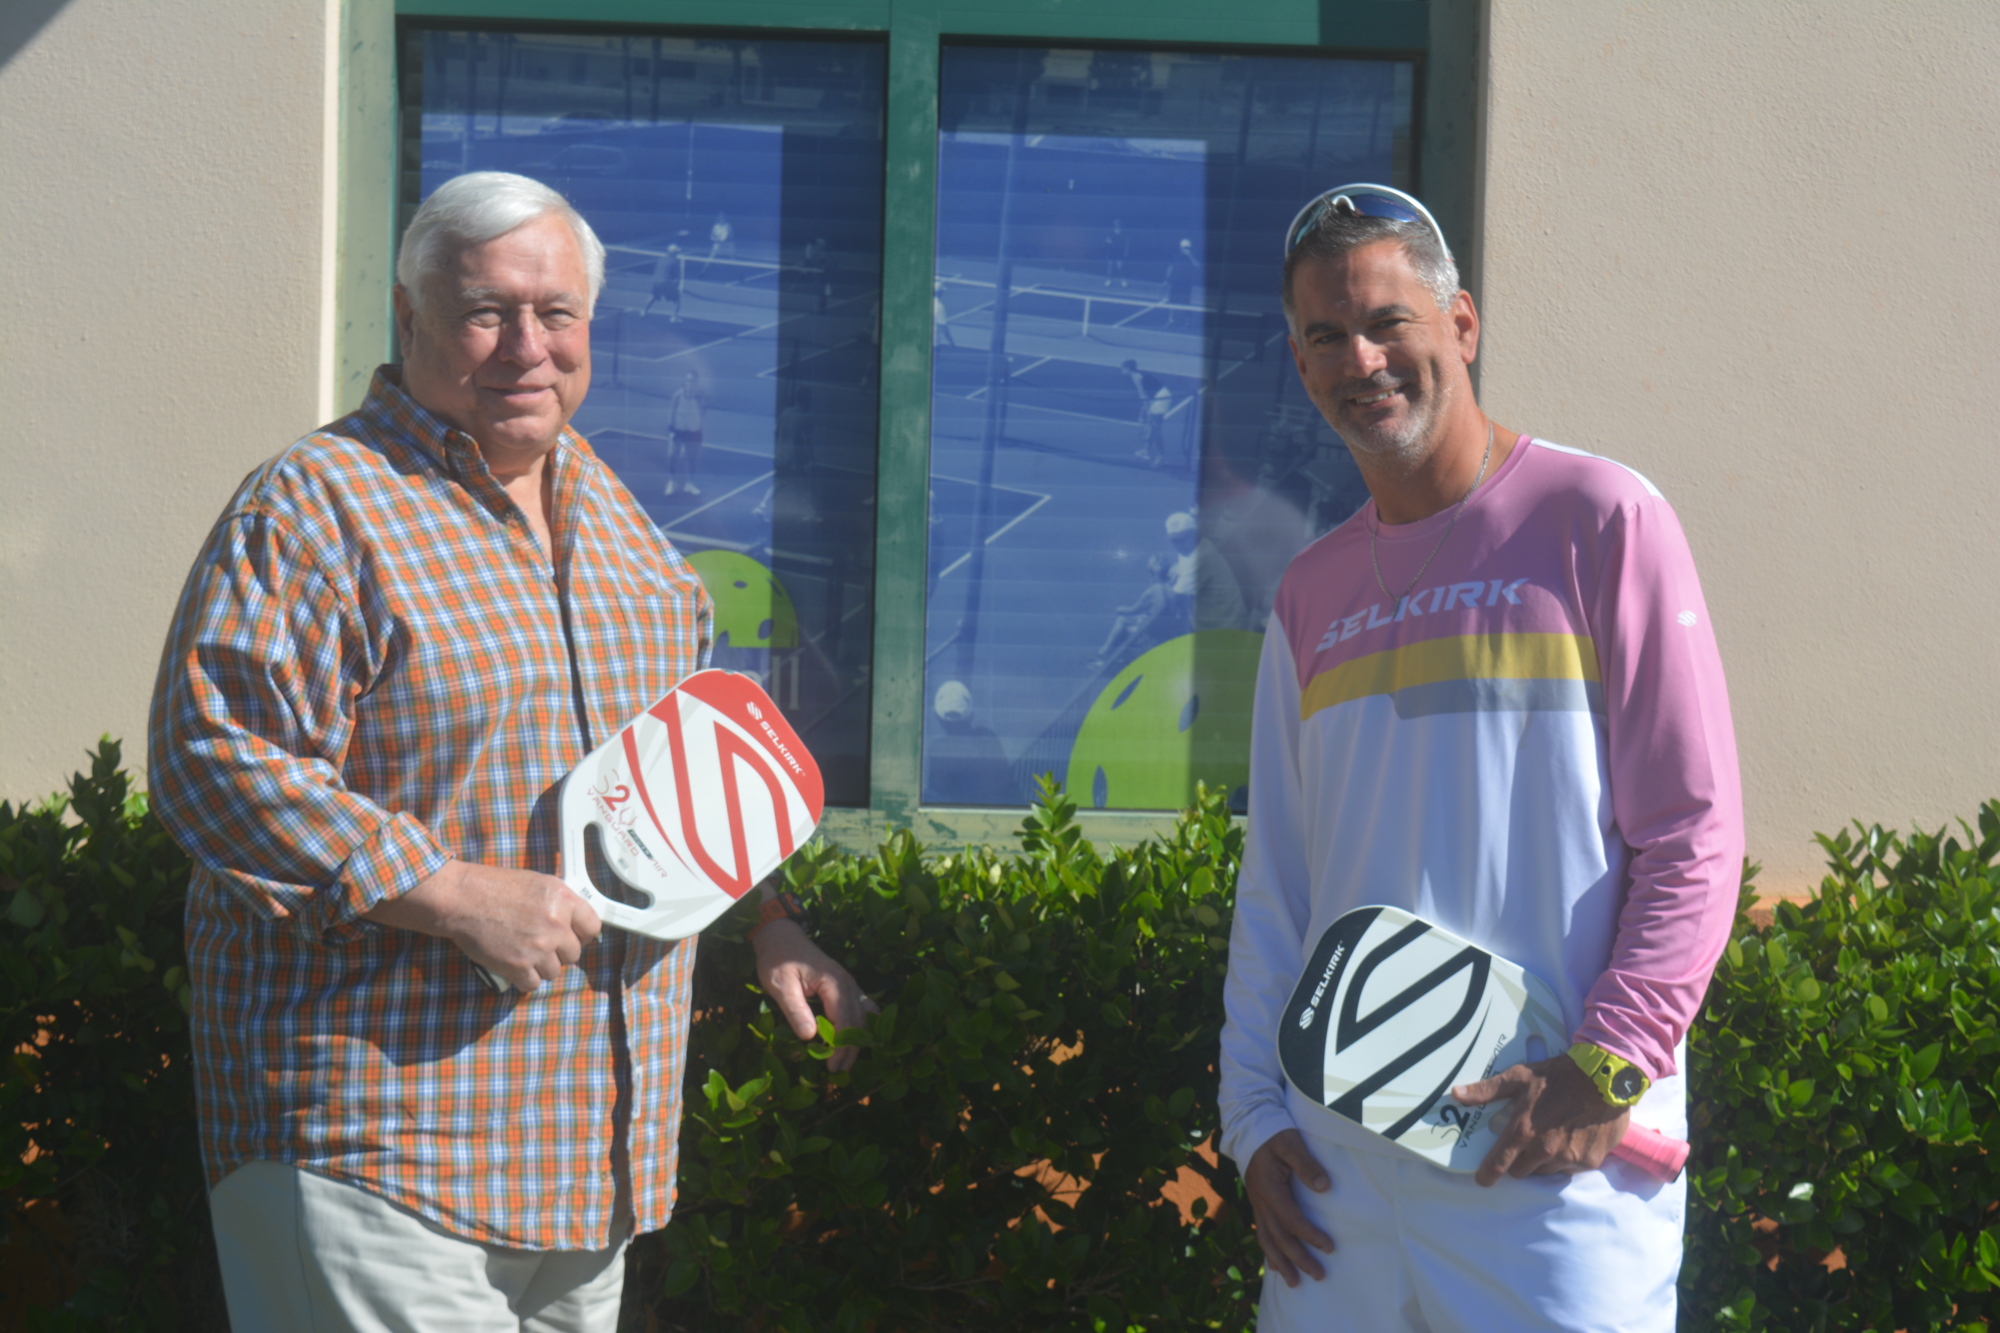 The Pickleball Club owner Brian McCarthy and general manager Dominic Catalano are excited about the growth the sport of pickleball has made in the last two years and believe people are ready for a dedicated facility in Sarasota. (Photo by Ryan Kohn)